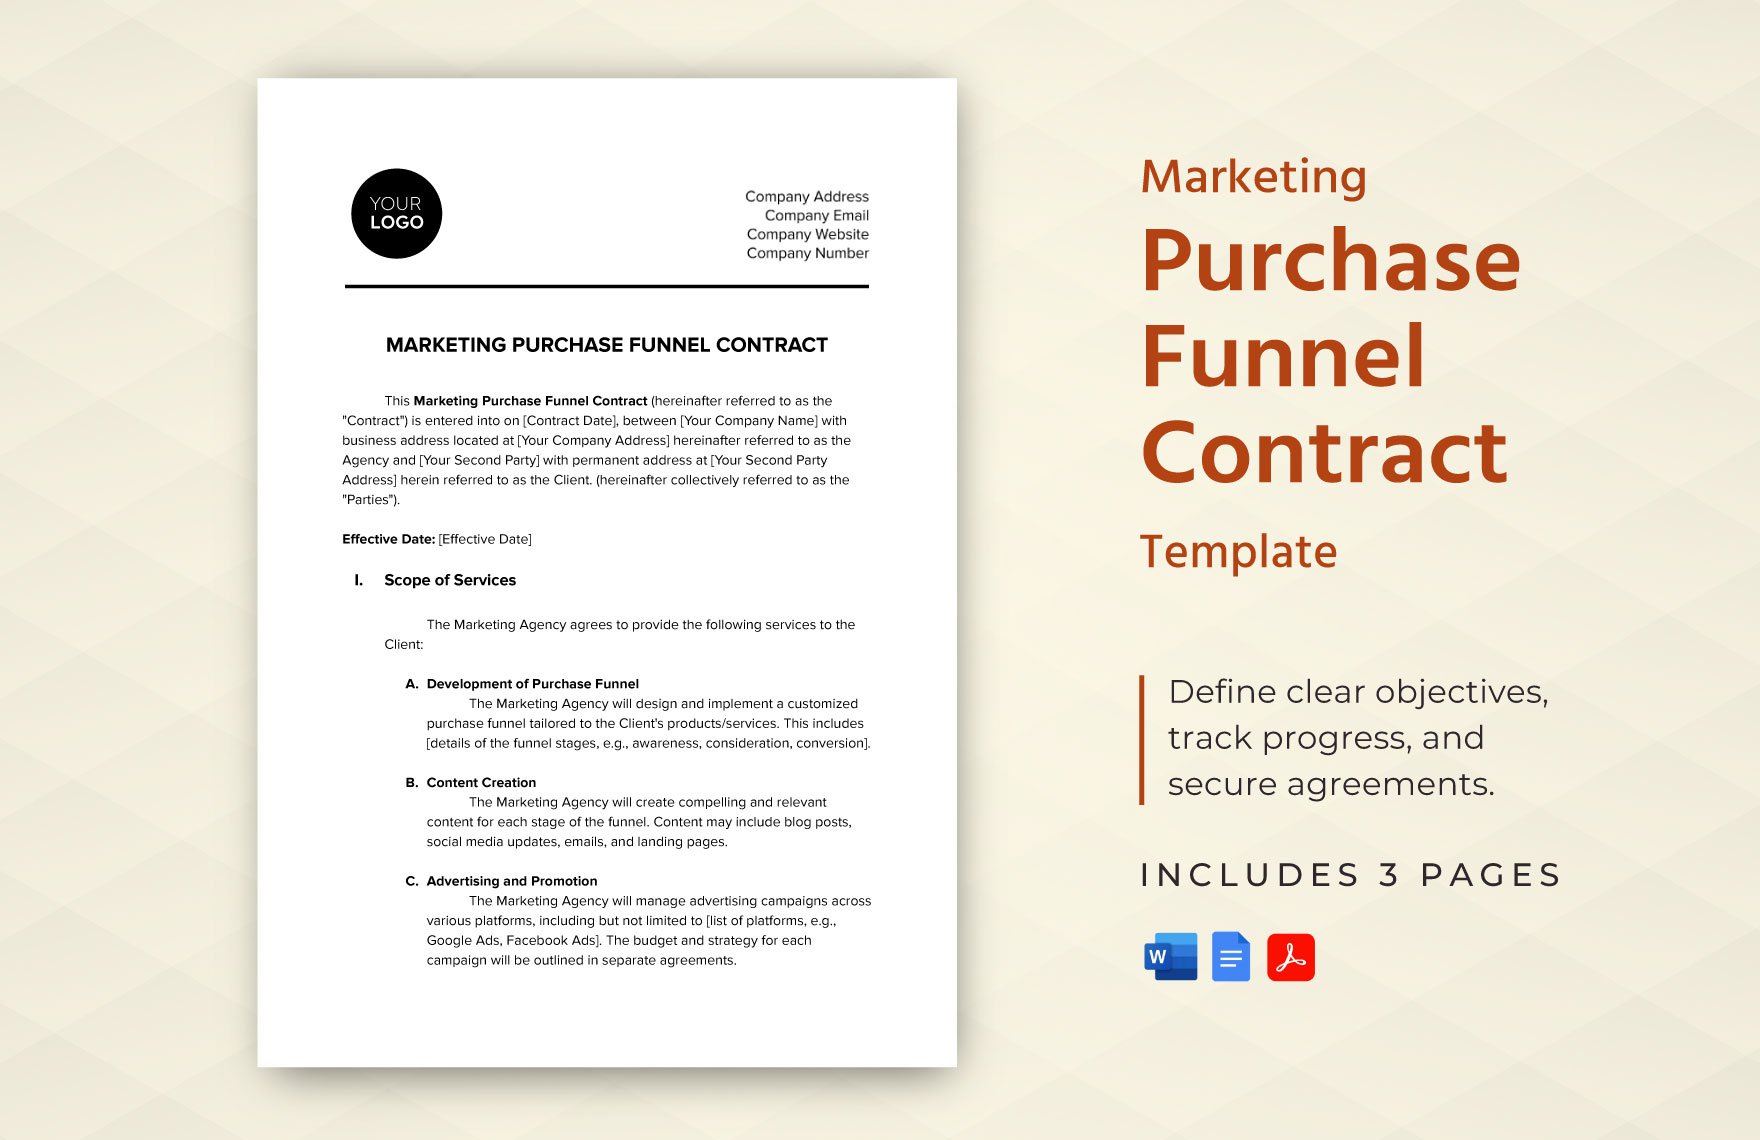 Marketing Purchase Funnel Contract Template in Word, Google Docs, PDF